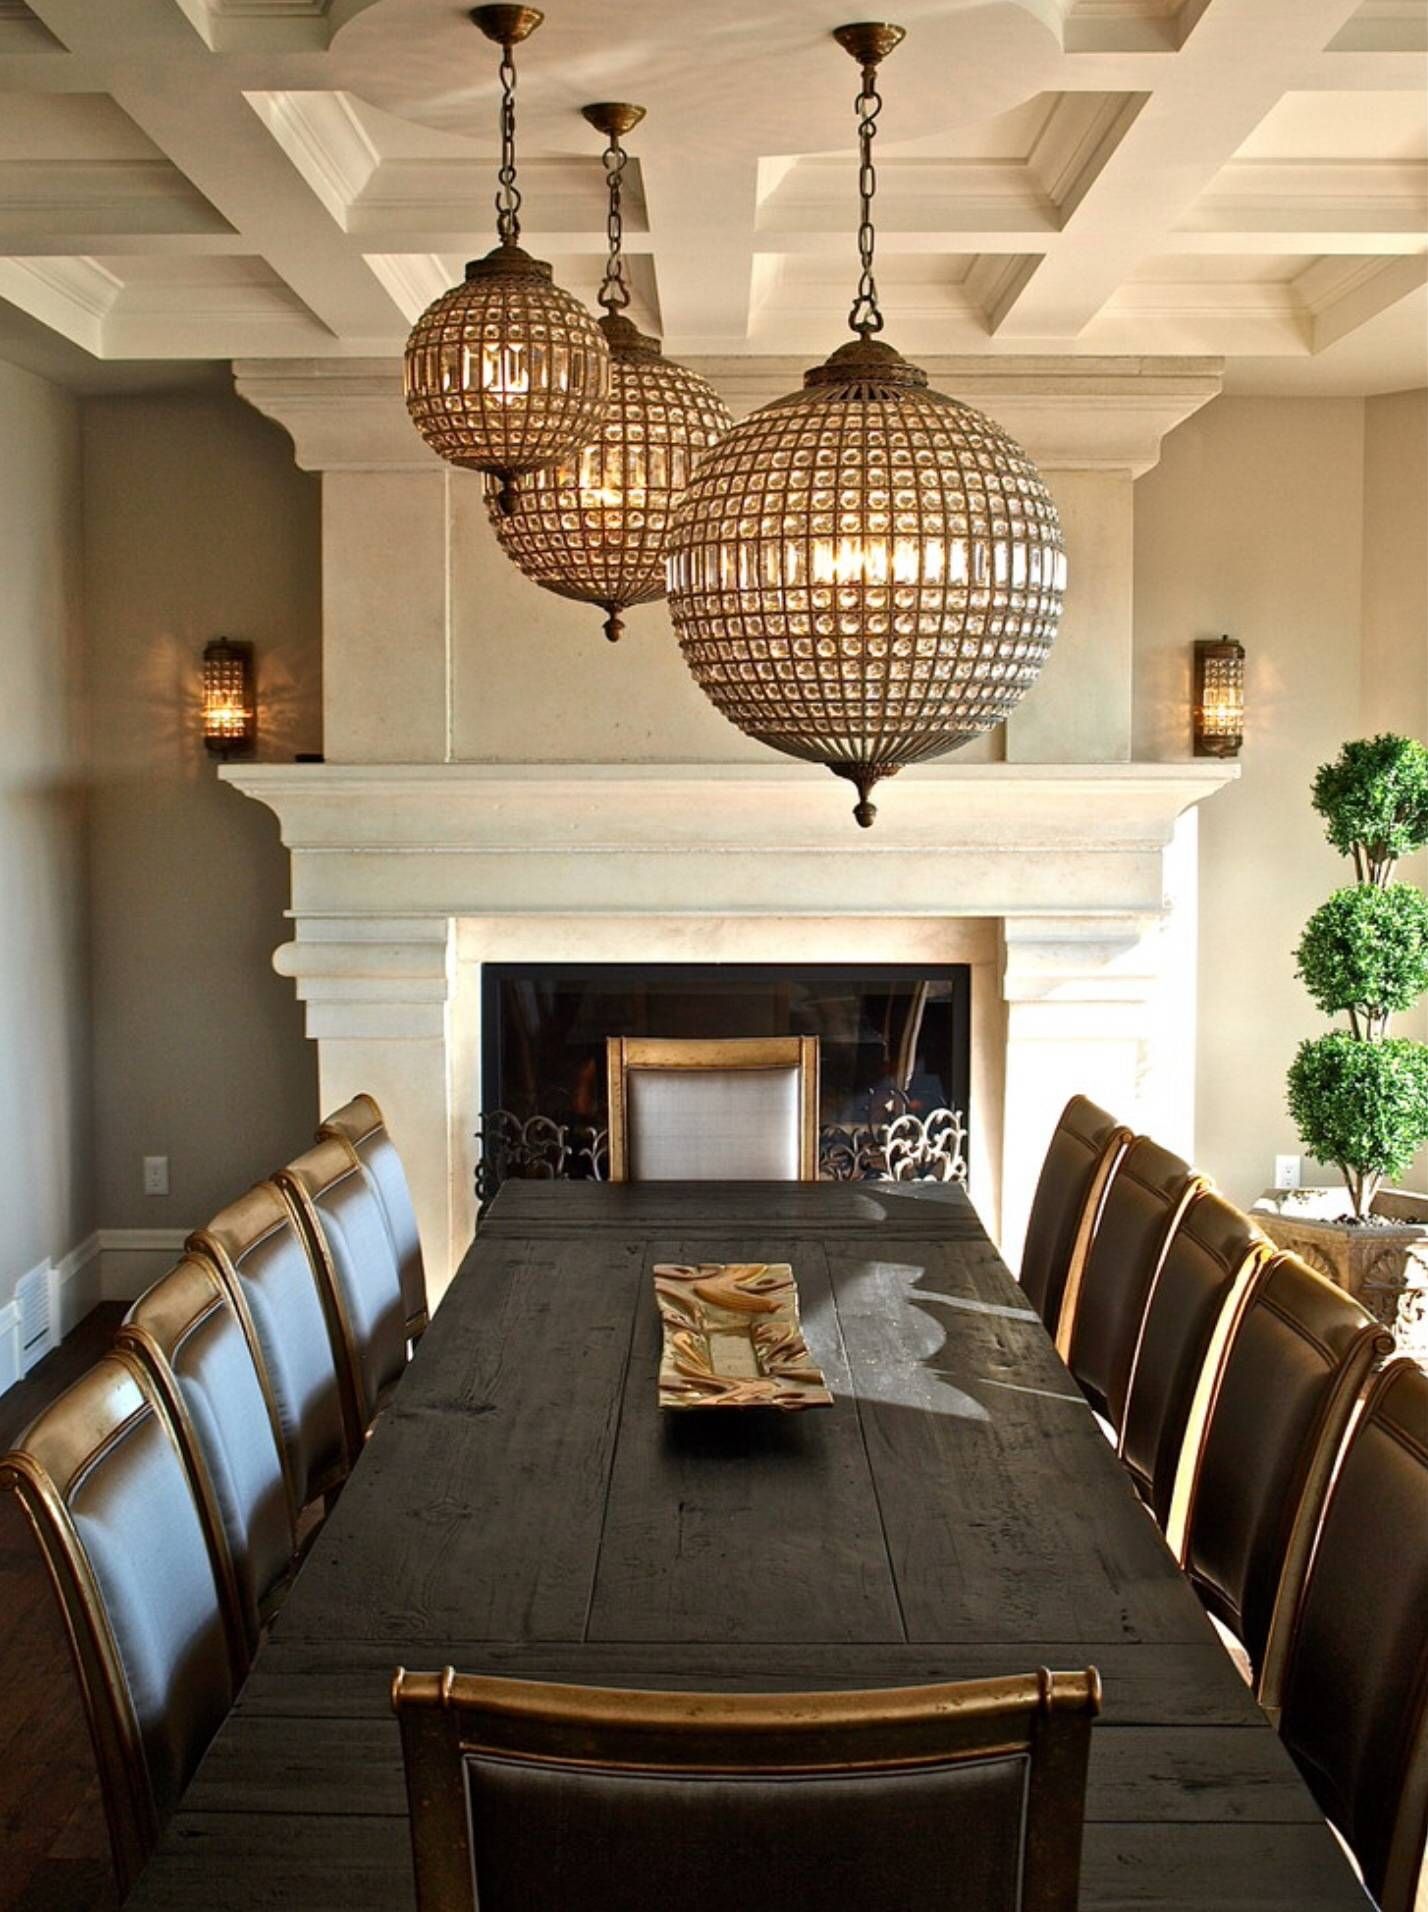 Restoration Hardware Light Fixtures All About House Design : How Within Restoration Hardware Pendant Lighting (View 11 of 15)